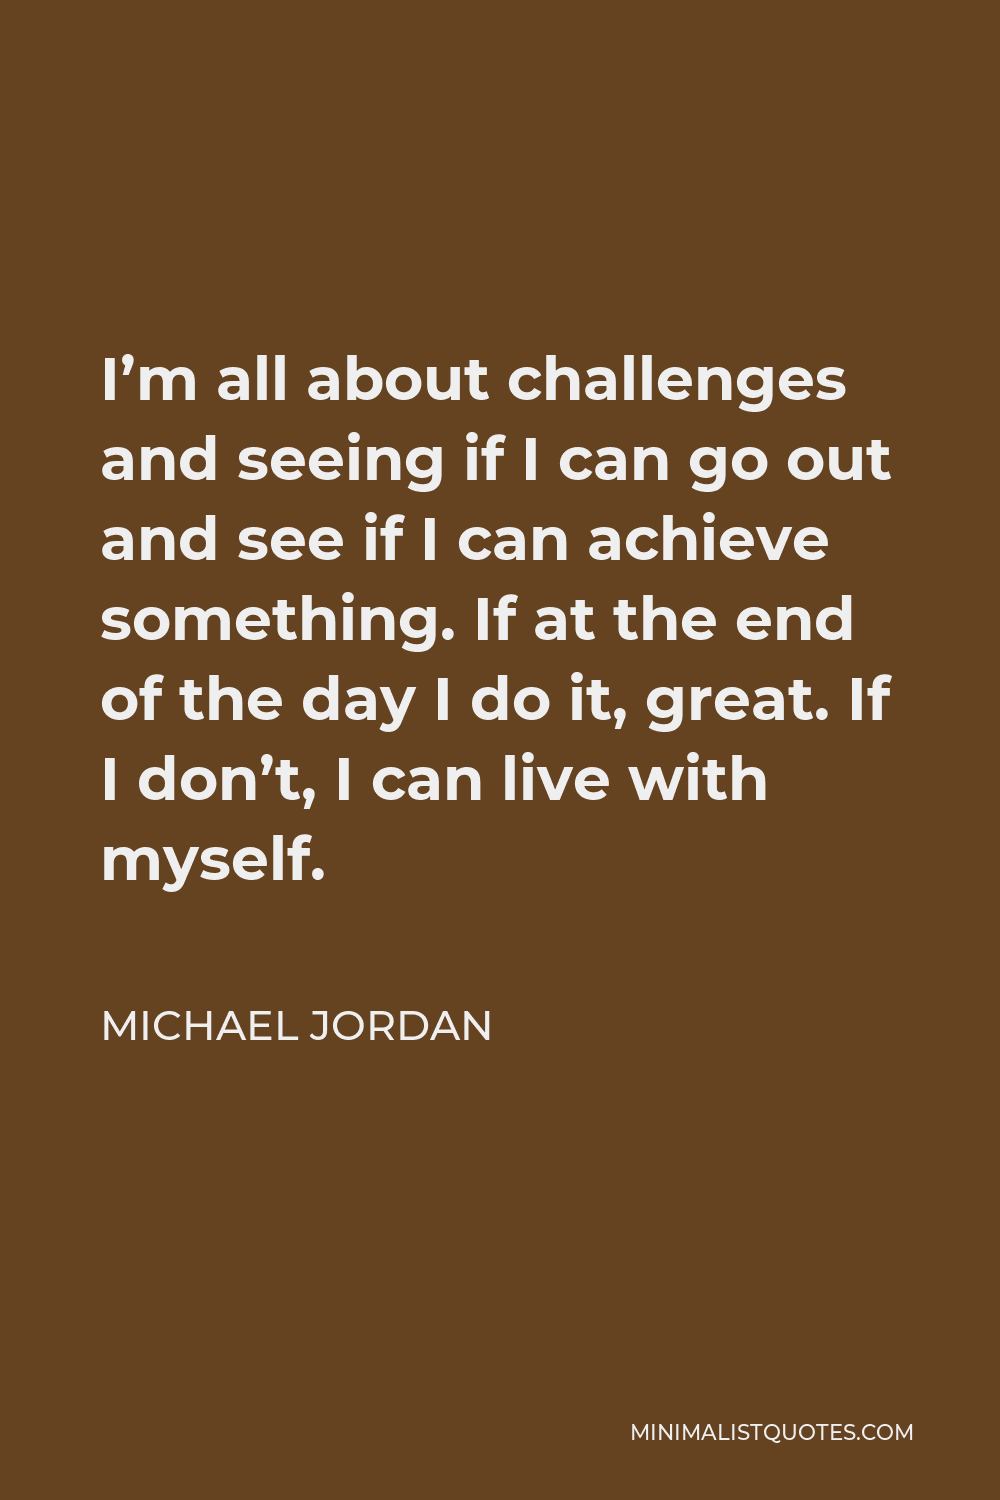 Michael Jordan Quote - I’m all about challenges and seeing if I can go out and see if I can achieve something. If at the end of the day I do it, great. If I don’t, I can live with myself.